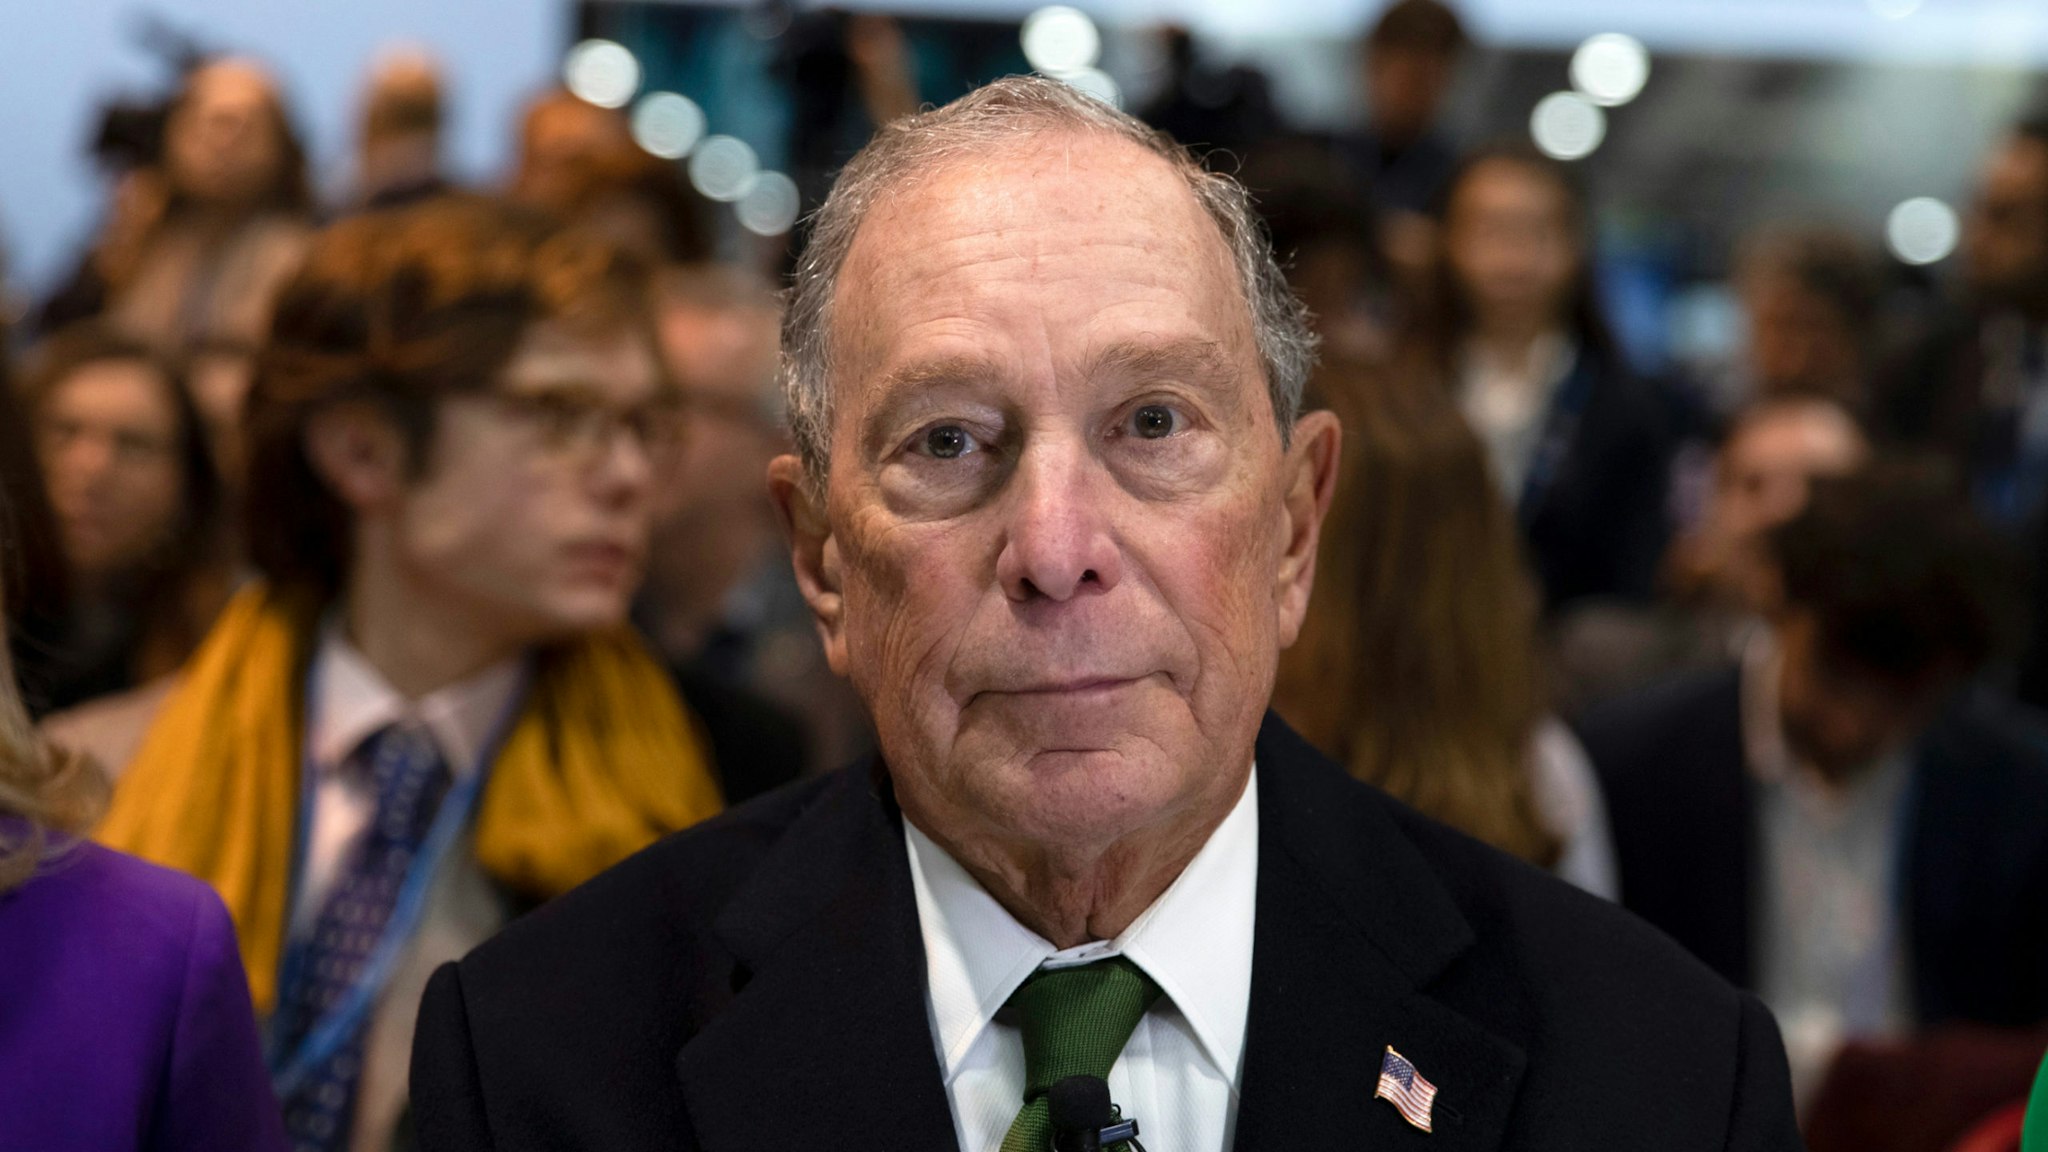 Democratic presidential candidate for US and former New York City Mayor Michael Bloomberg attends an event at the COP25 Climate Conference on December 10, 2019 in Madrid, Spain.